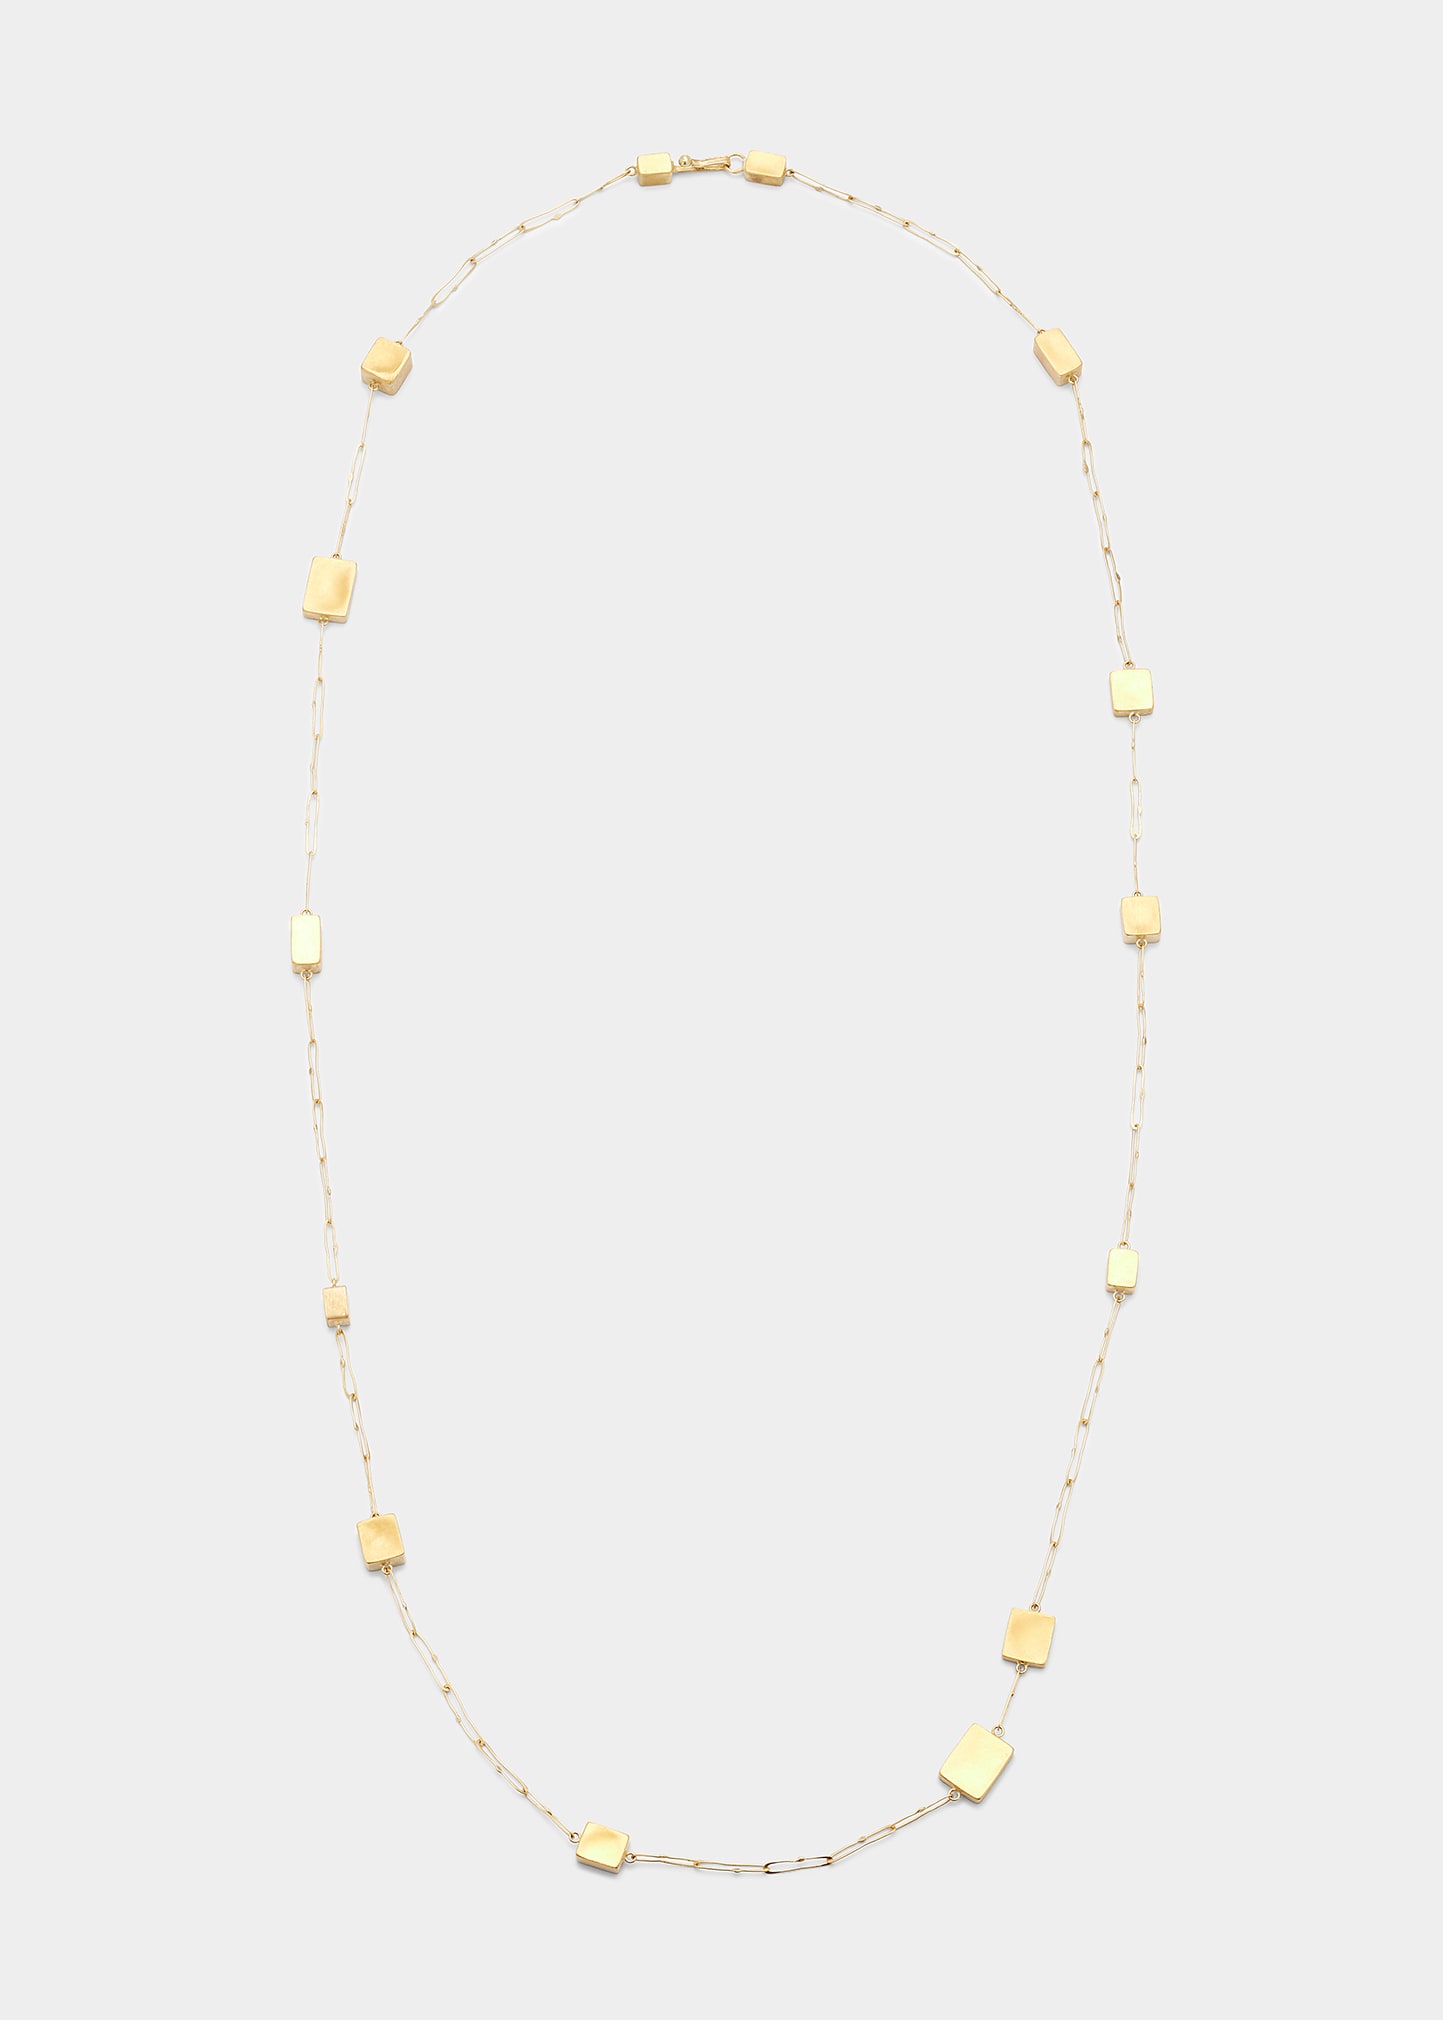 JUDY GEIB Long Mies Dream Necklace in 24K and 18K Gold